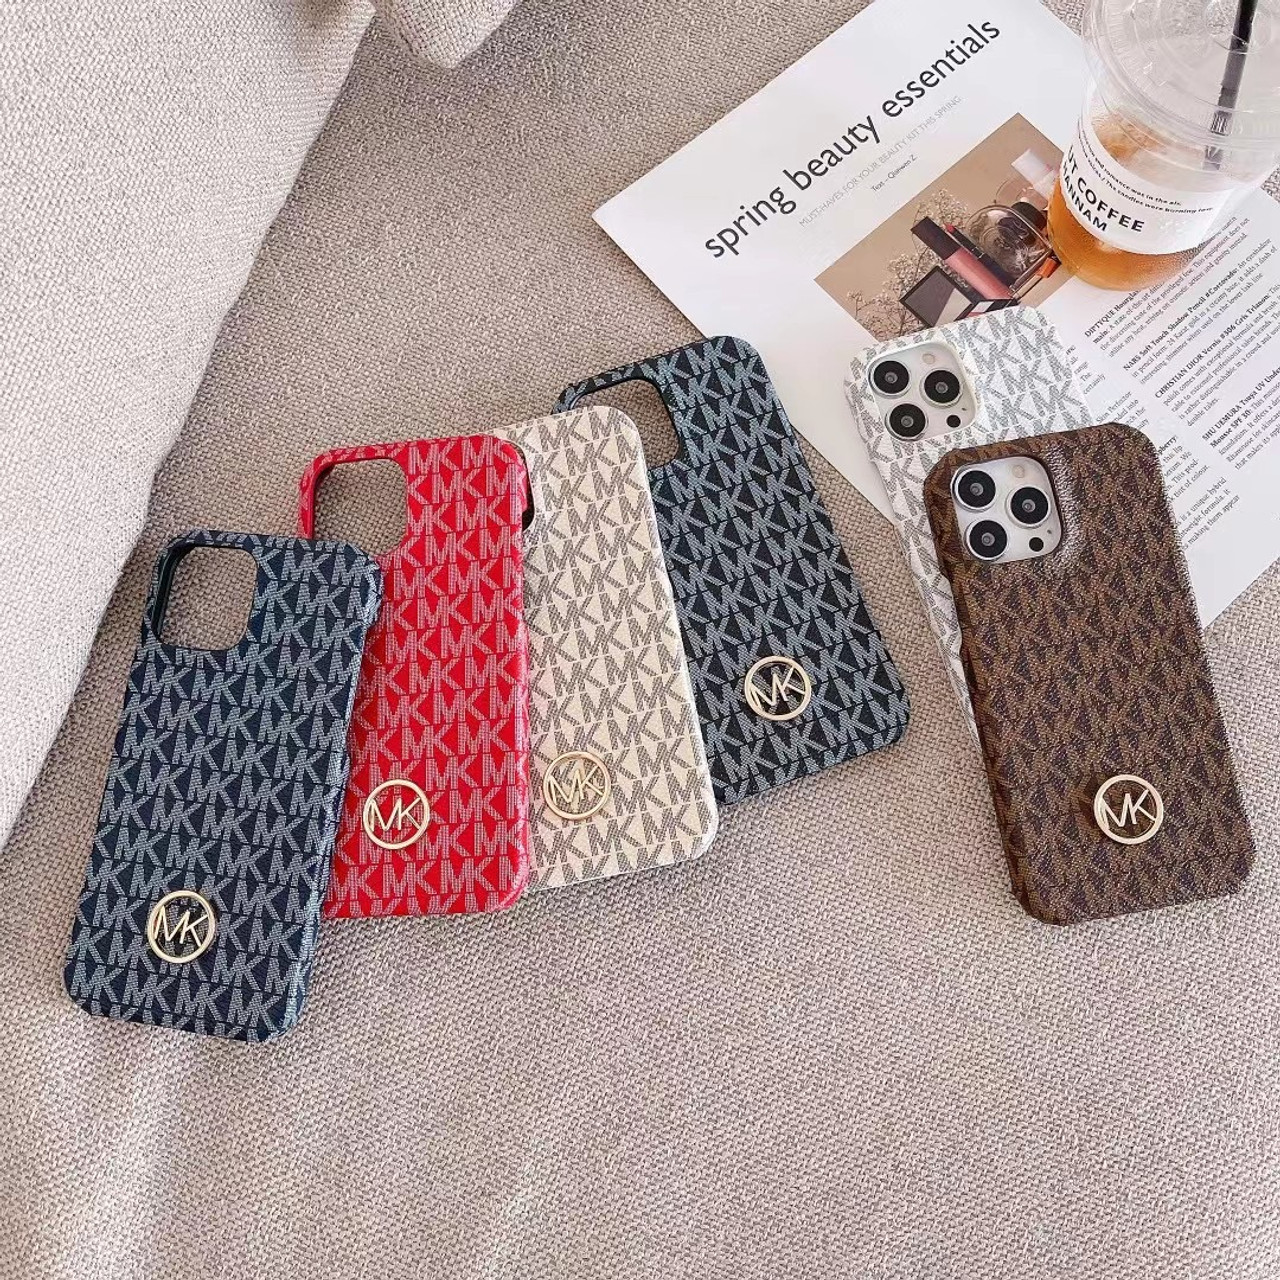 Michael Kors All Phone Cases in Phone Cases 